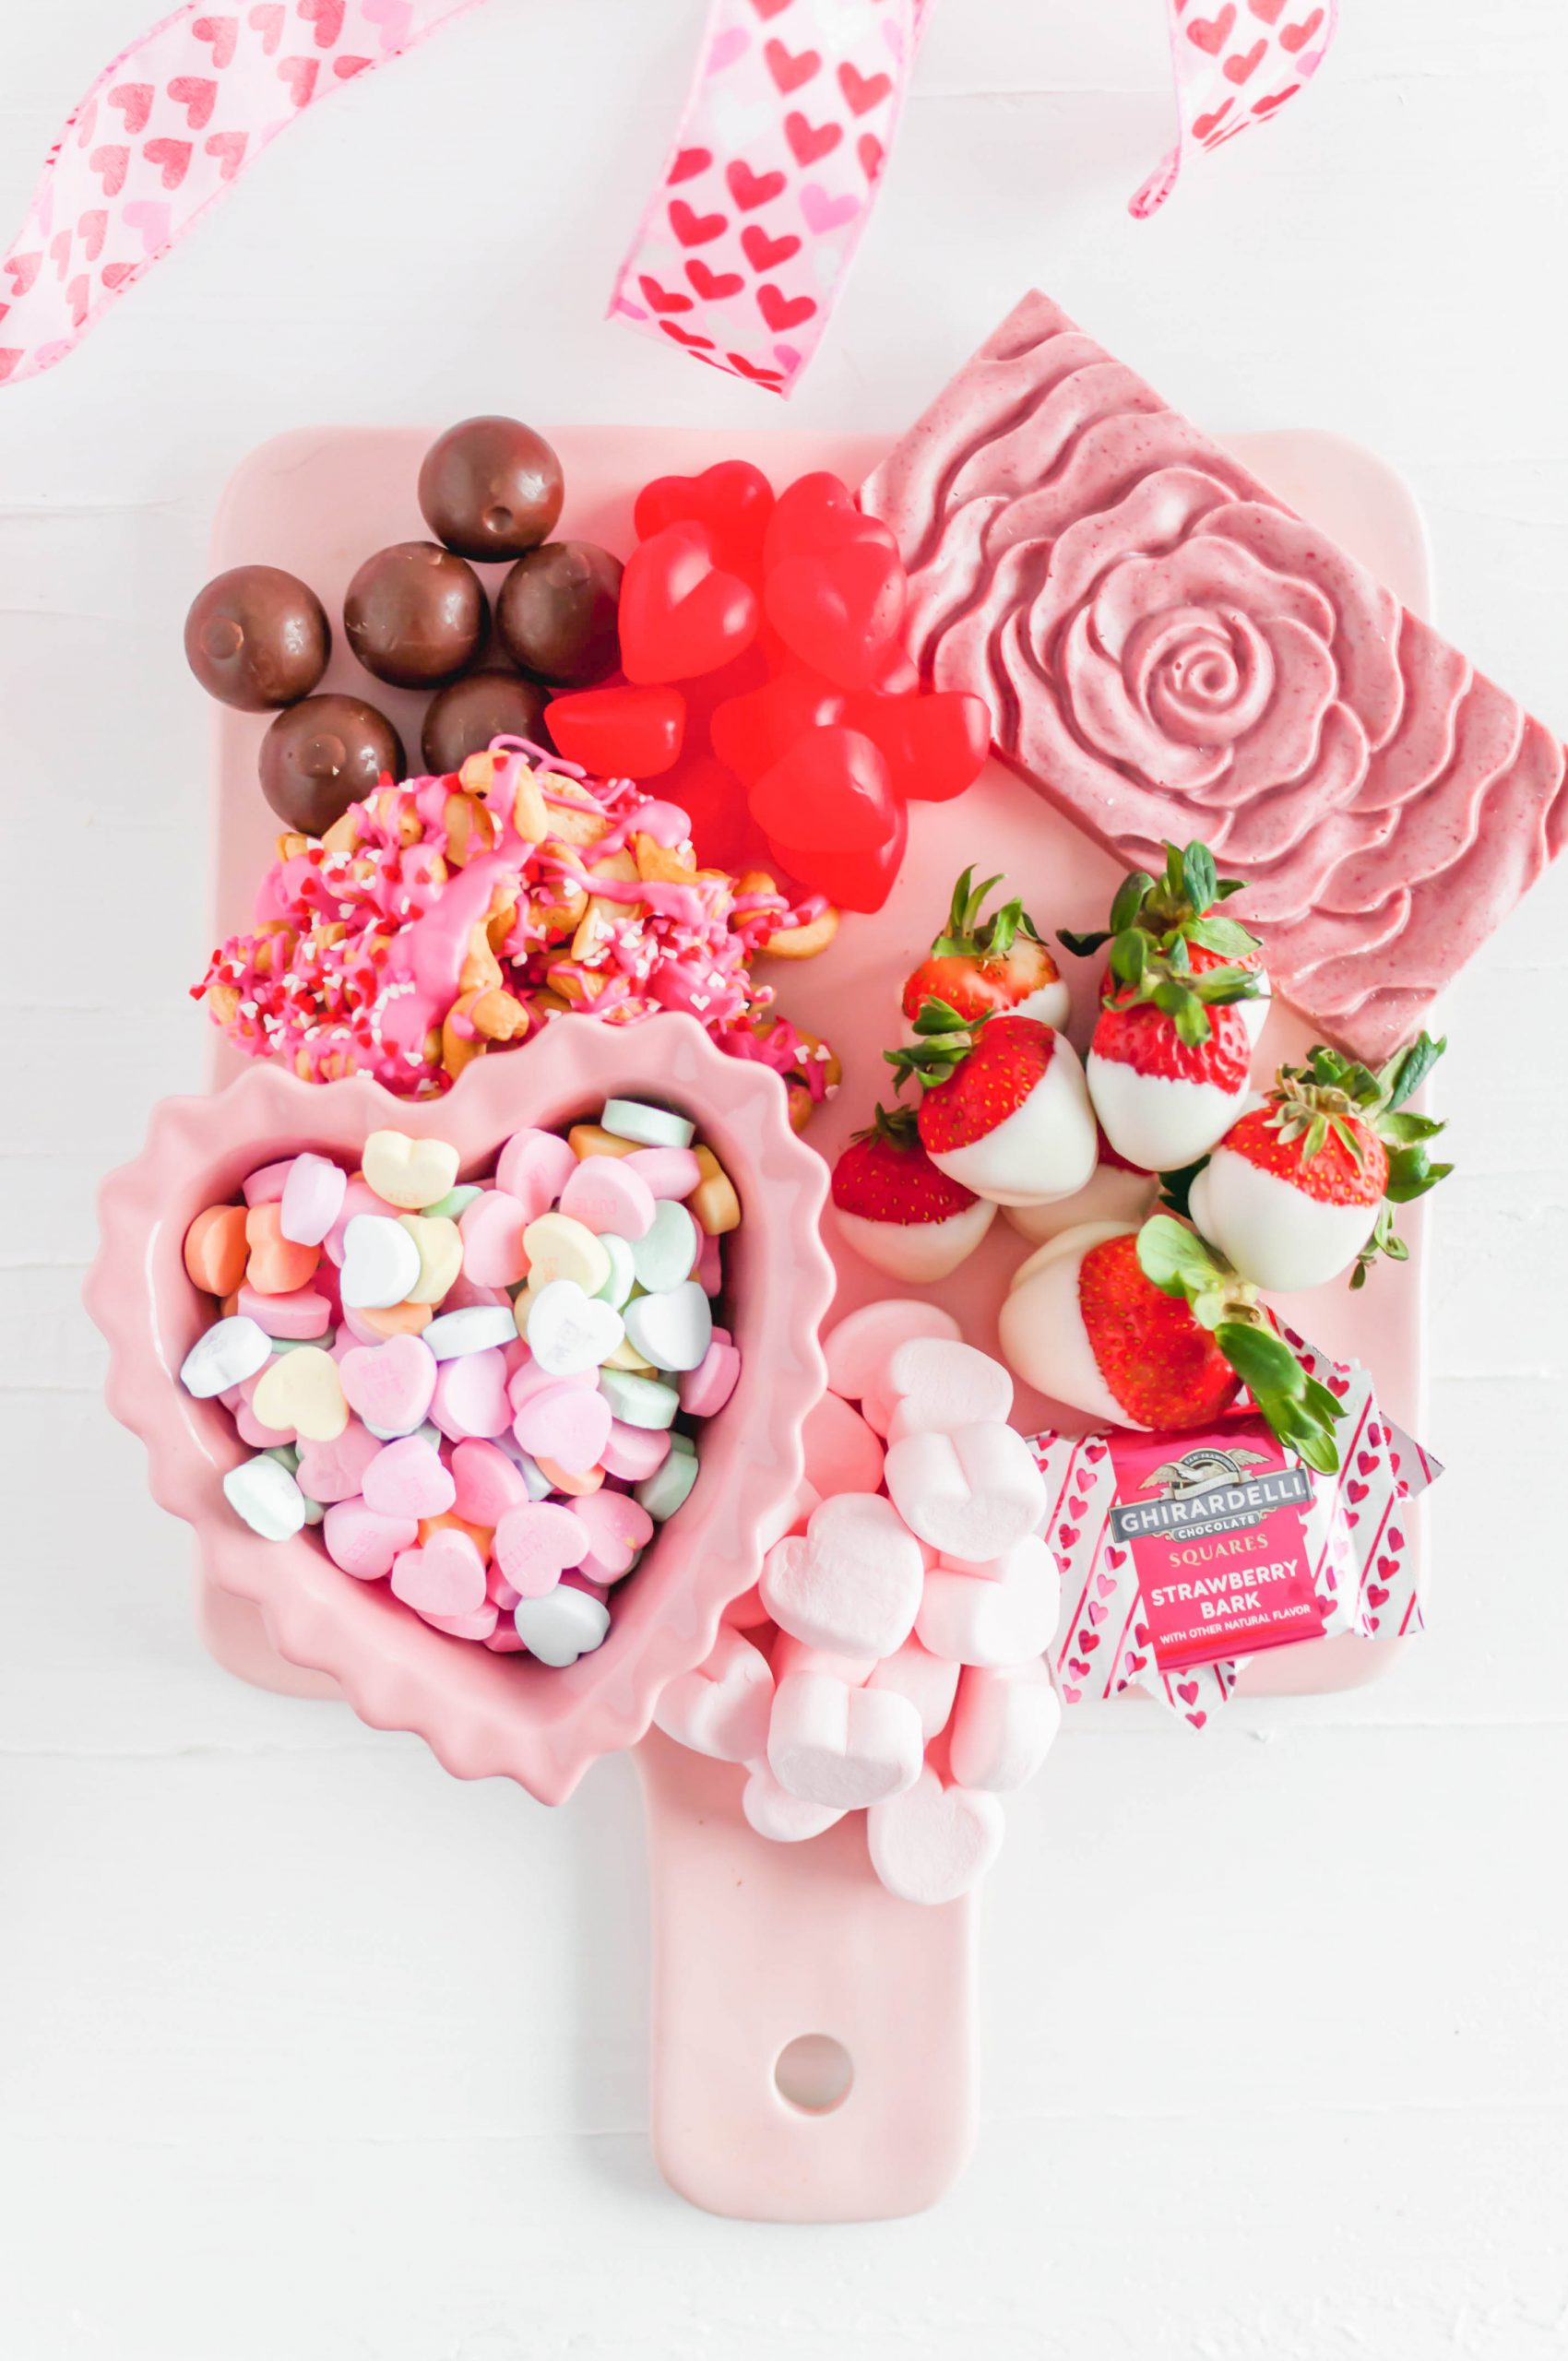 Keep your Valentine's dessert easy, fun, delicious and festive this year with this Valentine's Dessert Board. A few simple, homemade treats mixed in with some adorable store-bought options.